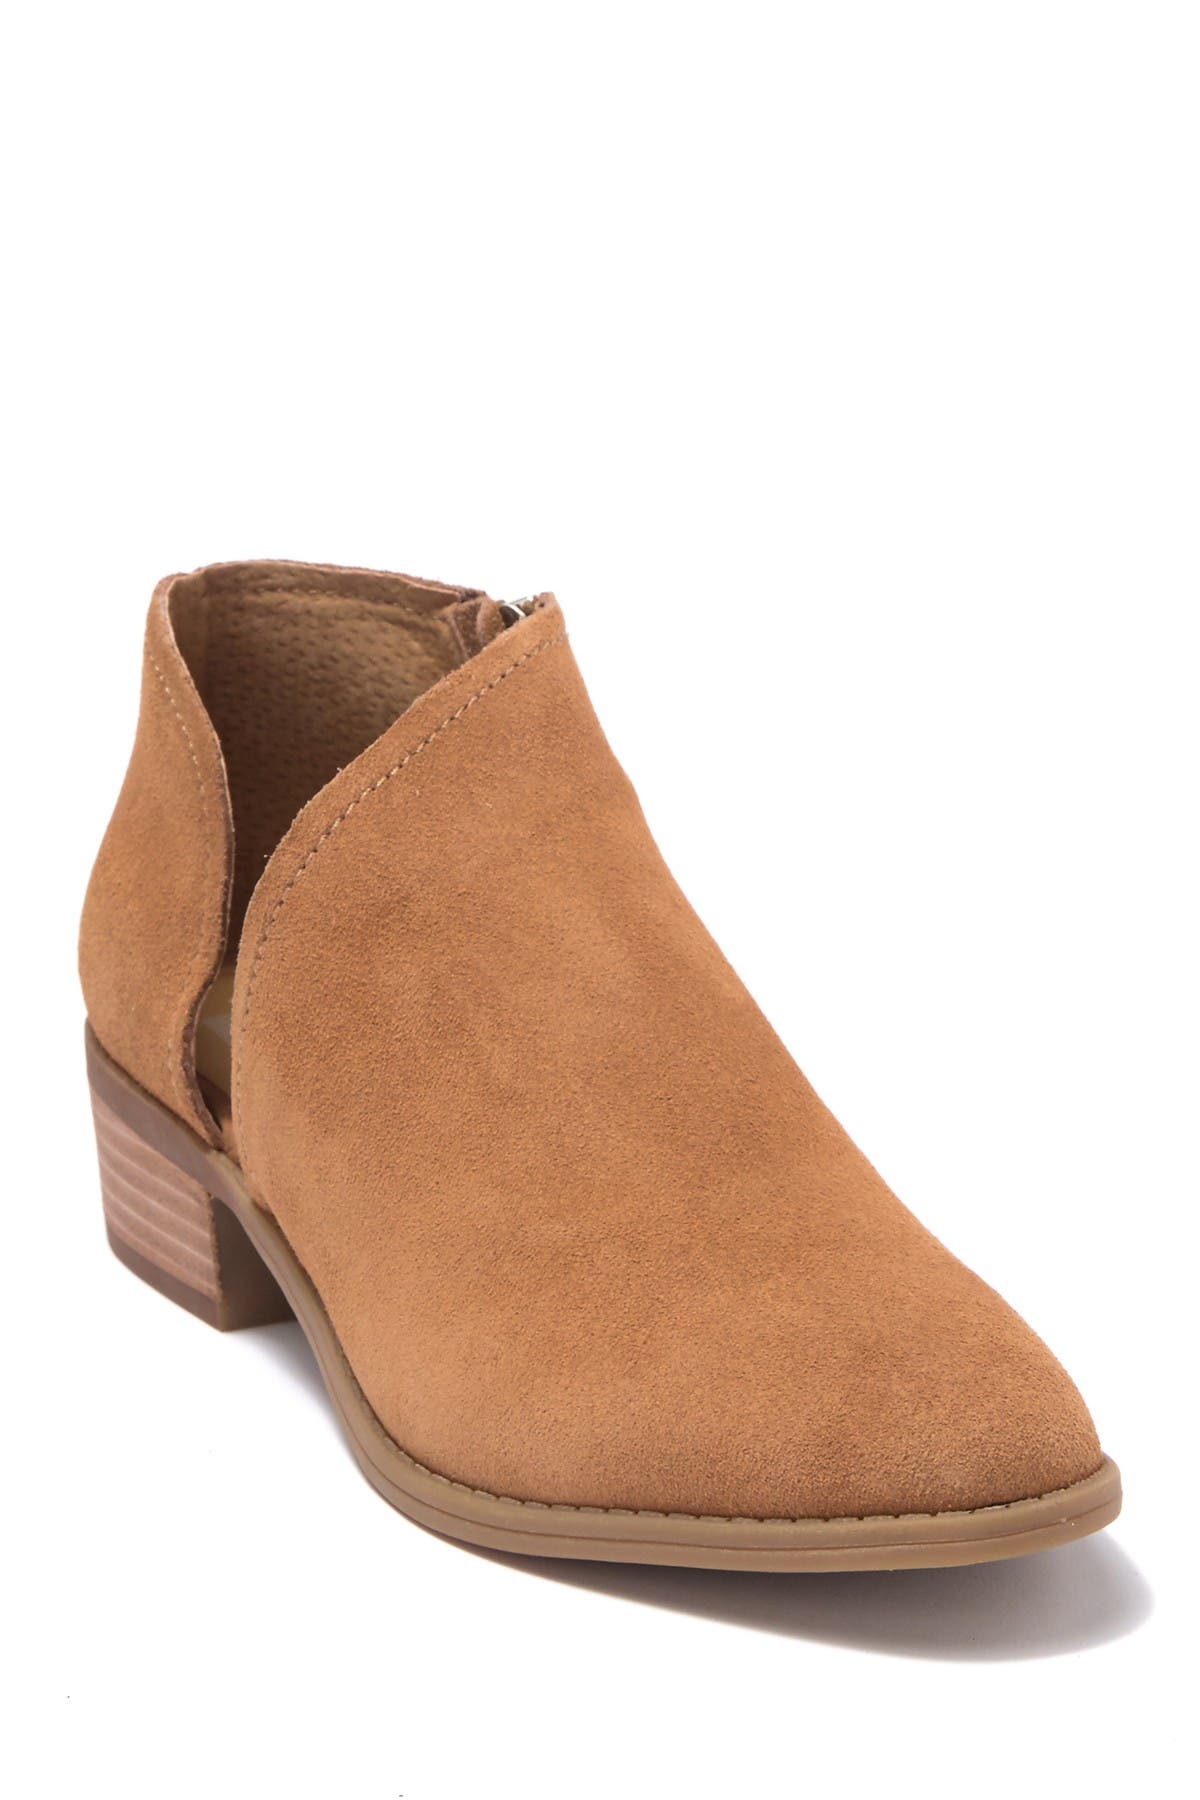 dolce vita tassy suede ankle boot